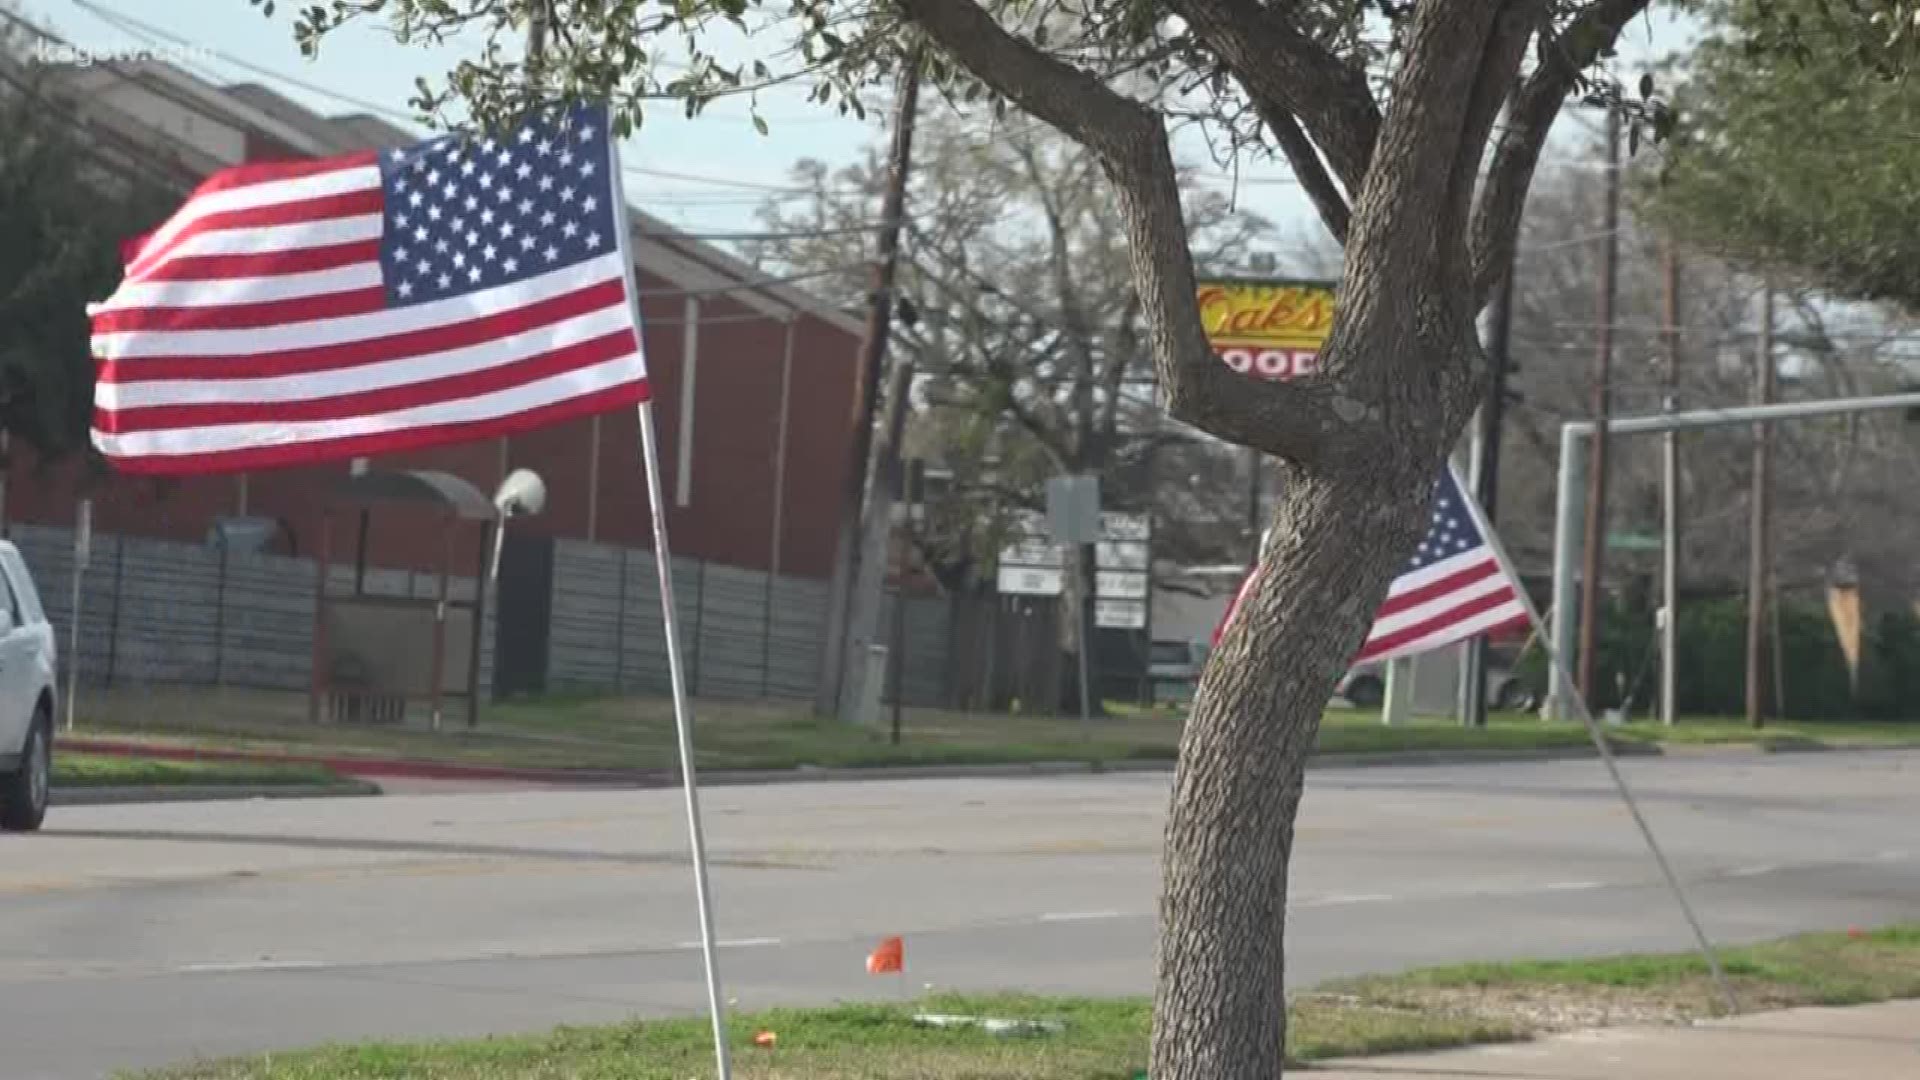 The flags were set up by a local Boy Scout troop with the help of the Bryan Rotary Club.